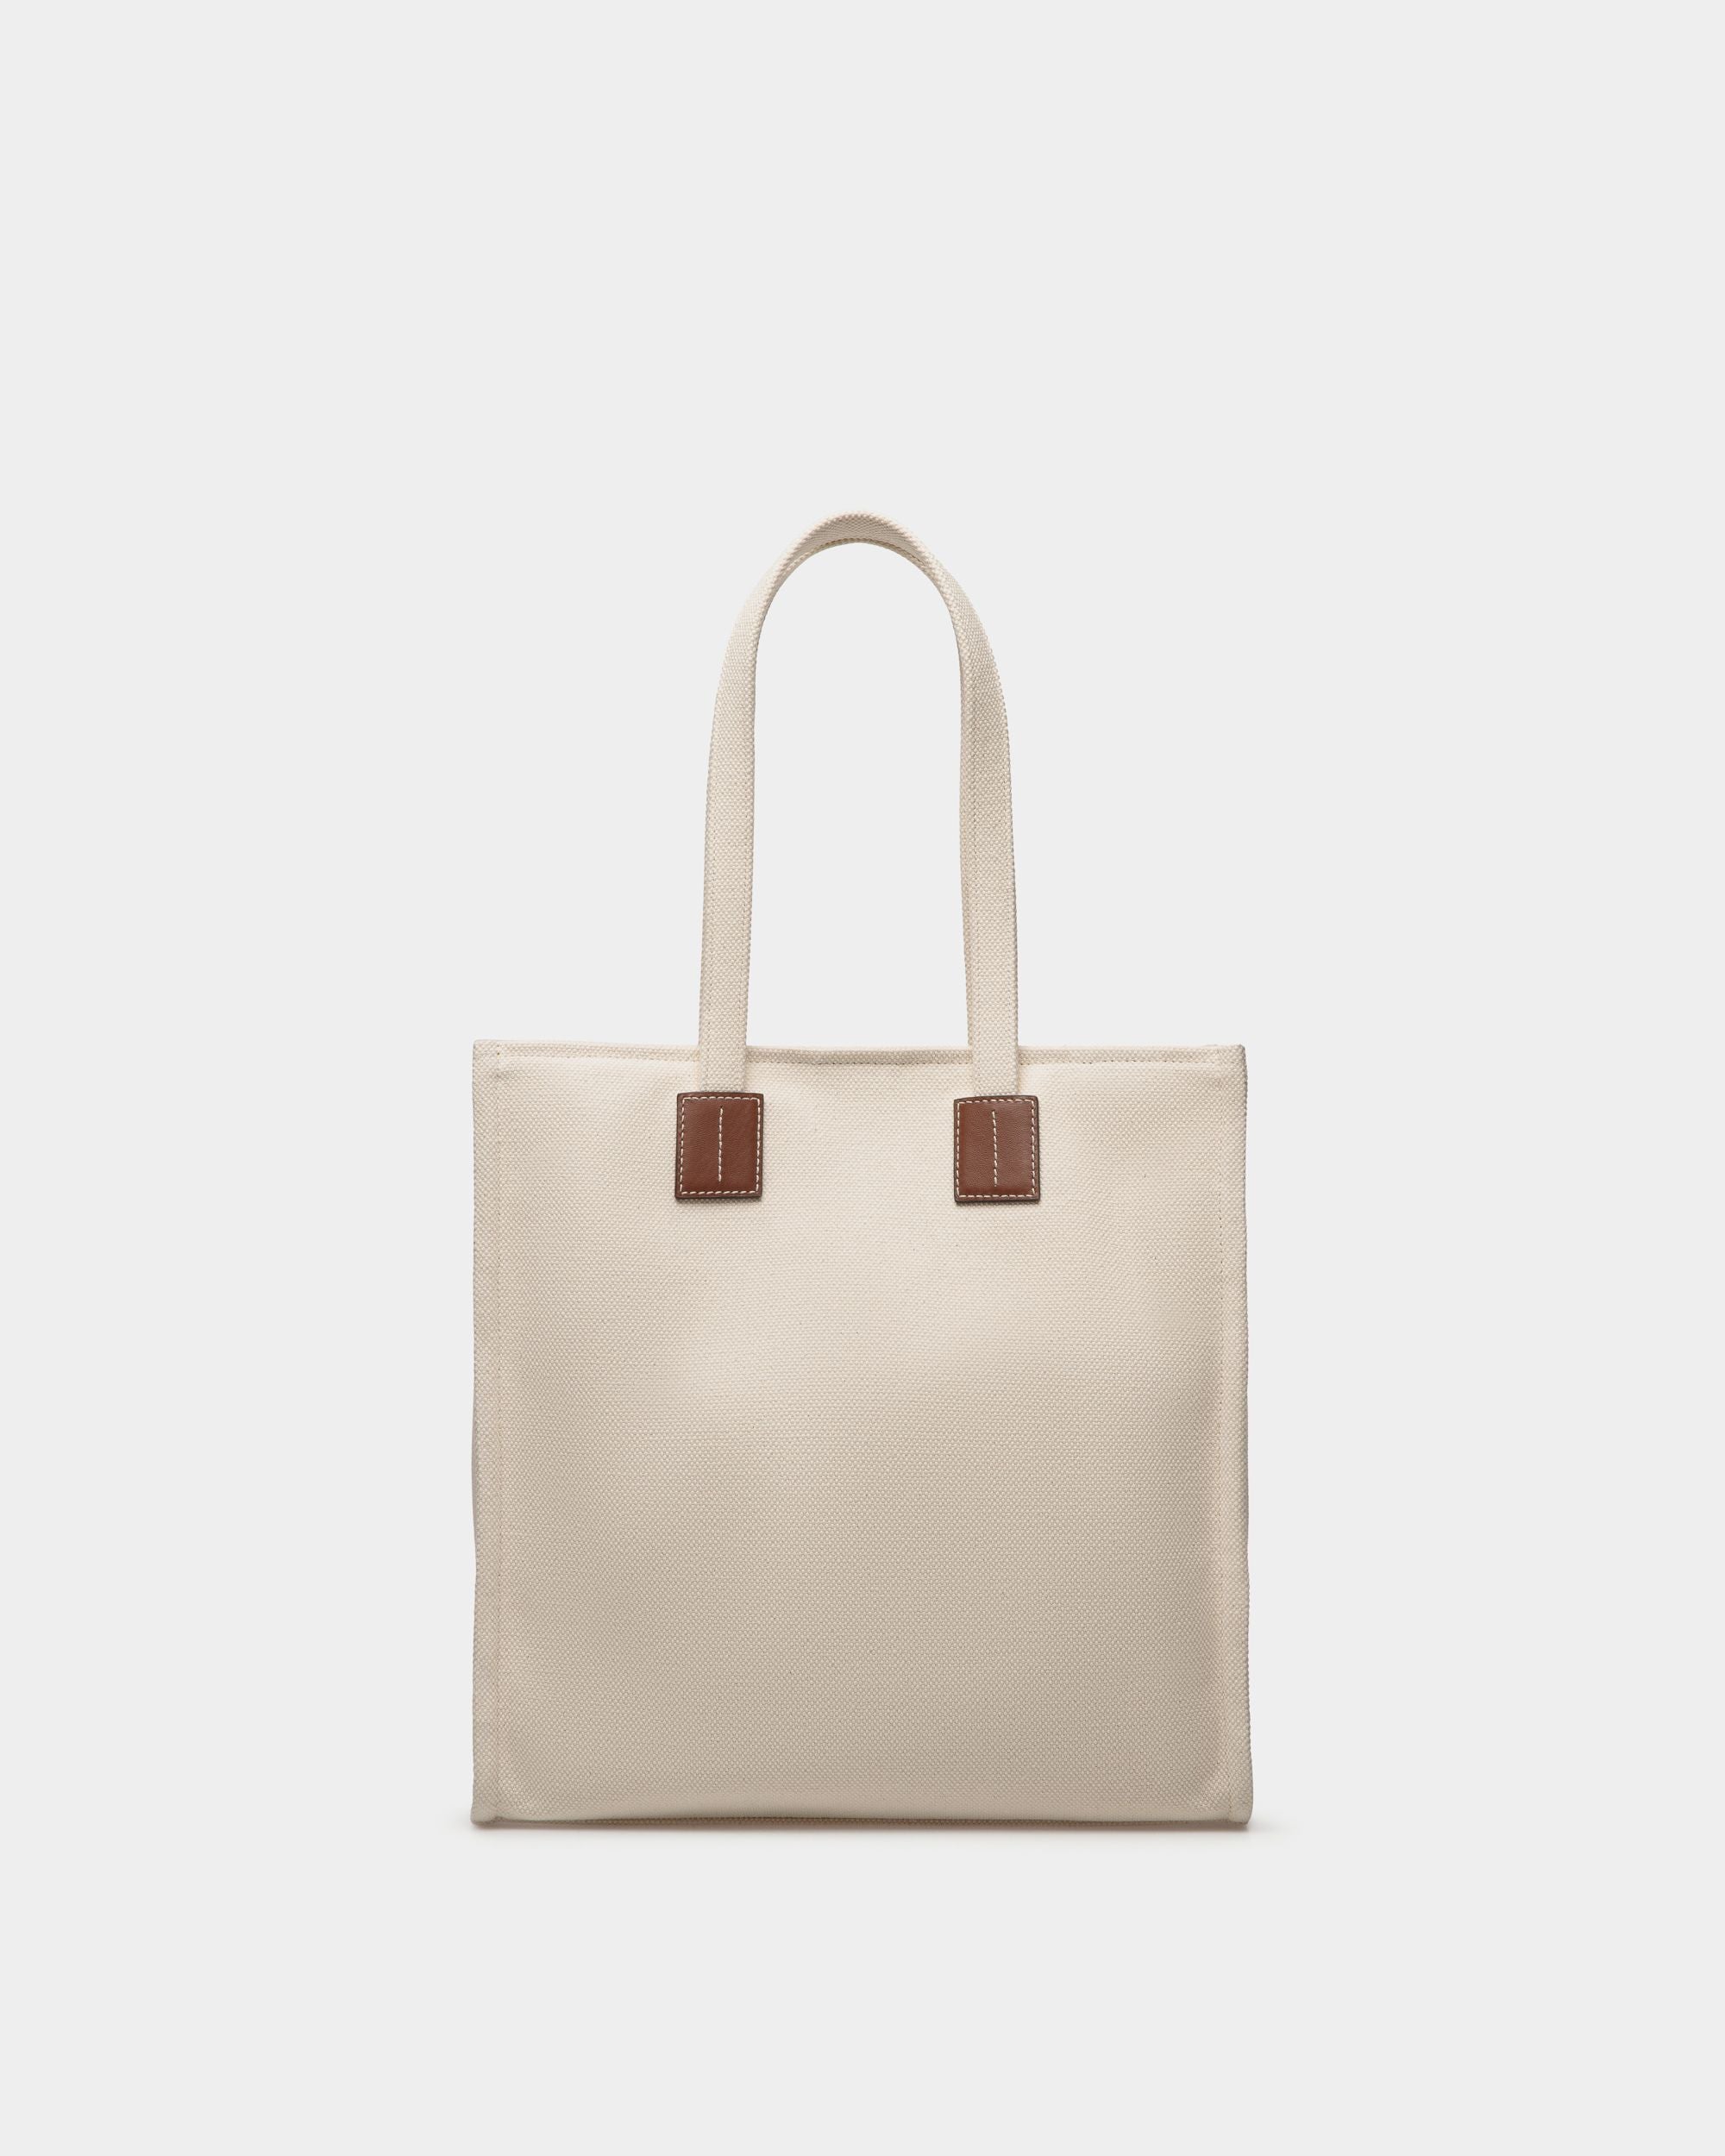 Akelei | Women's Tote Bag in Neutral Canvas | Bally | Still Life Back